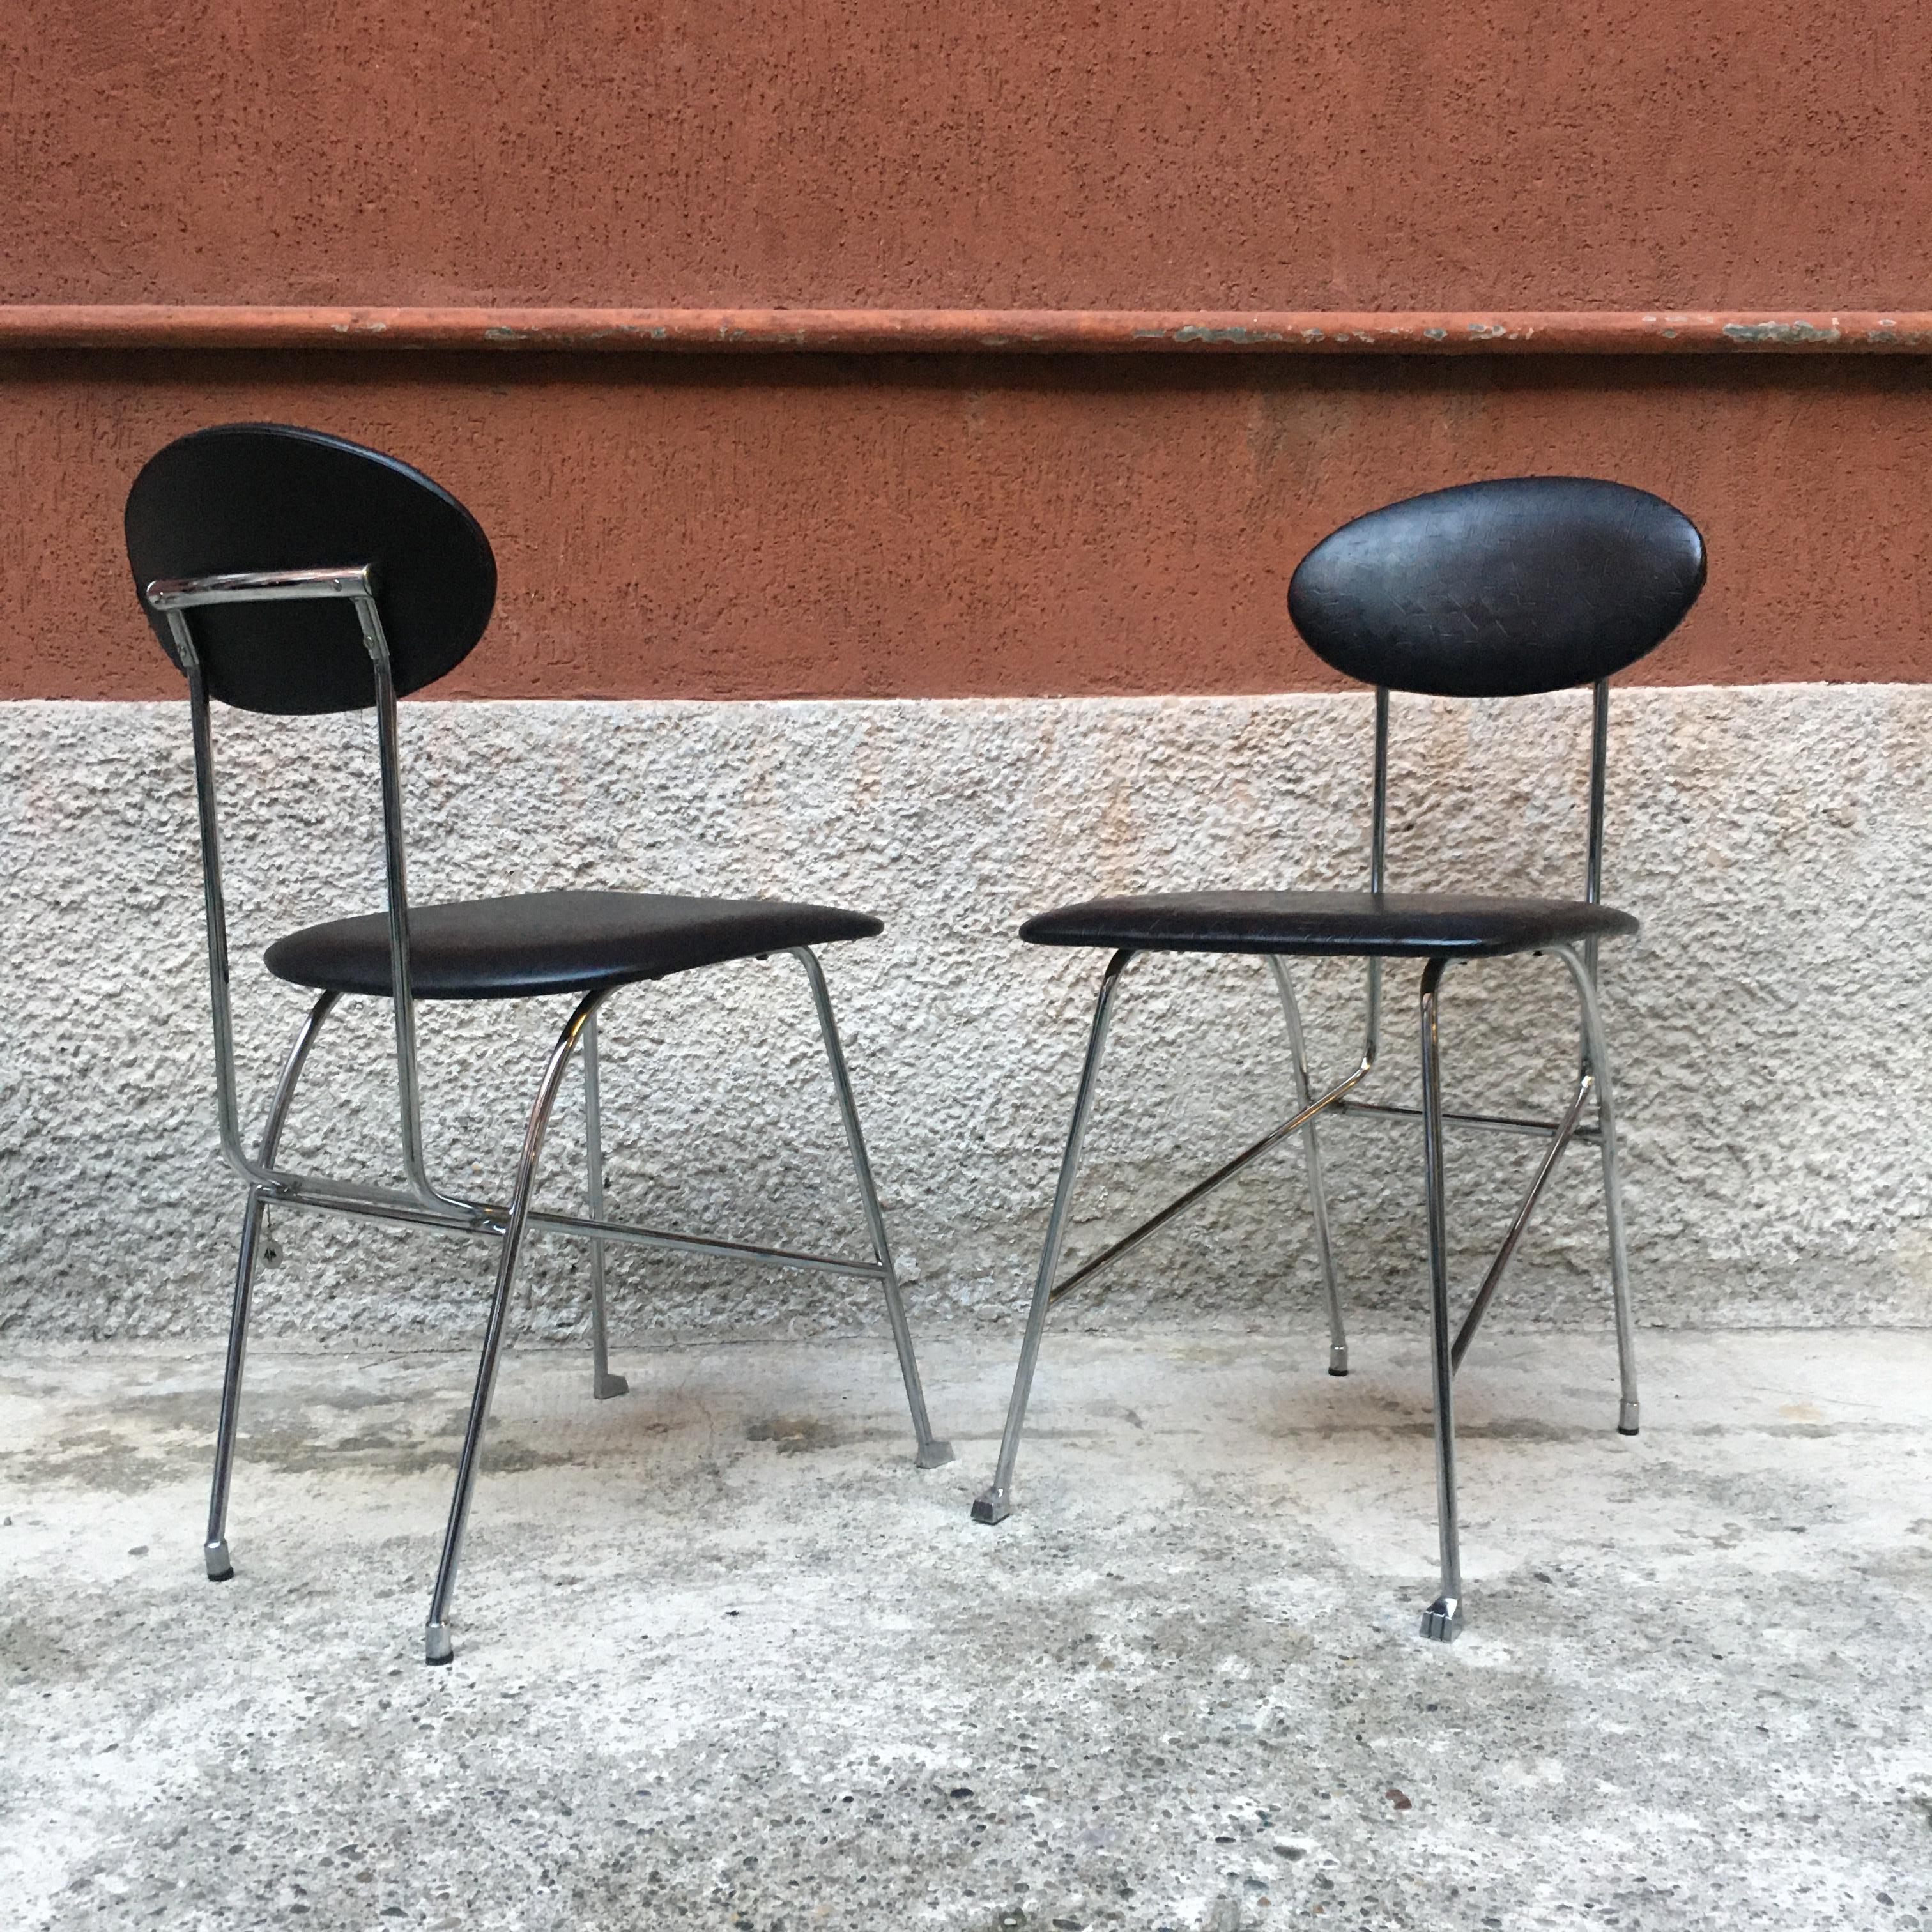 Italian chromed metal chair with leather cover by Mendini for Zabro, 1980s
Chair with chromed metal frame, with elegant toe cap and seat and back in black leather, designed by Alessandro Mendini for Zabro.
On one of the two seats there is the